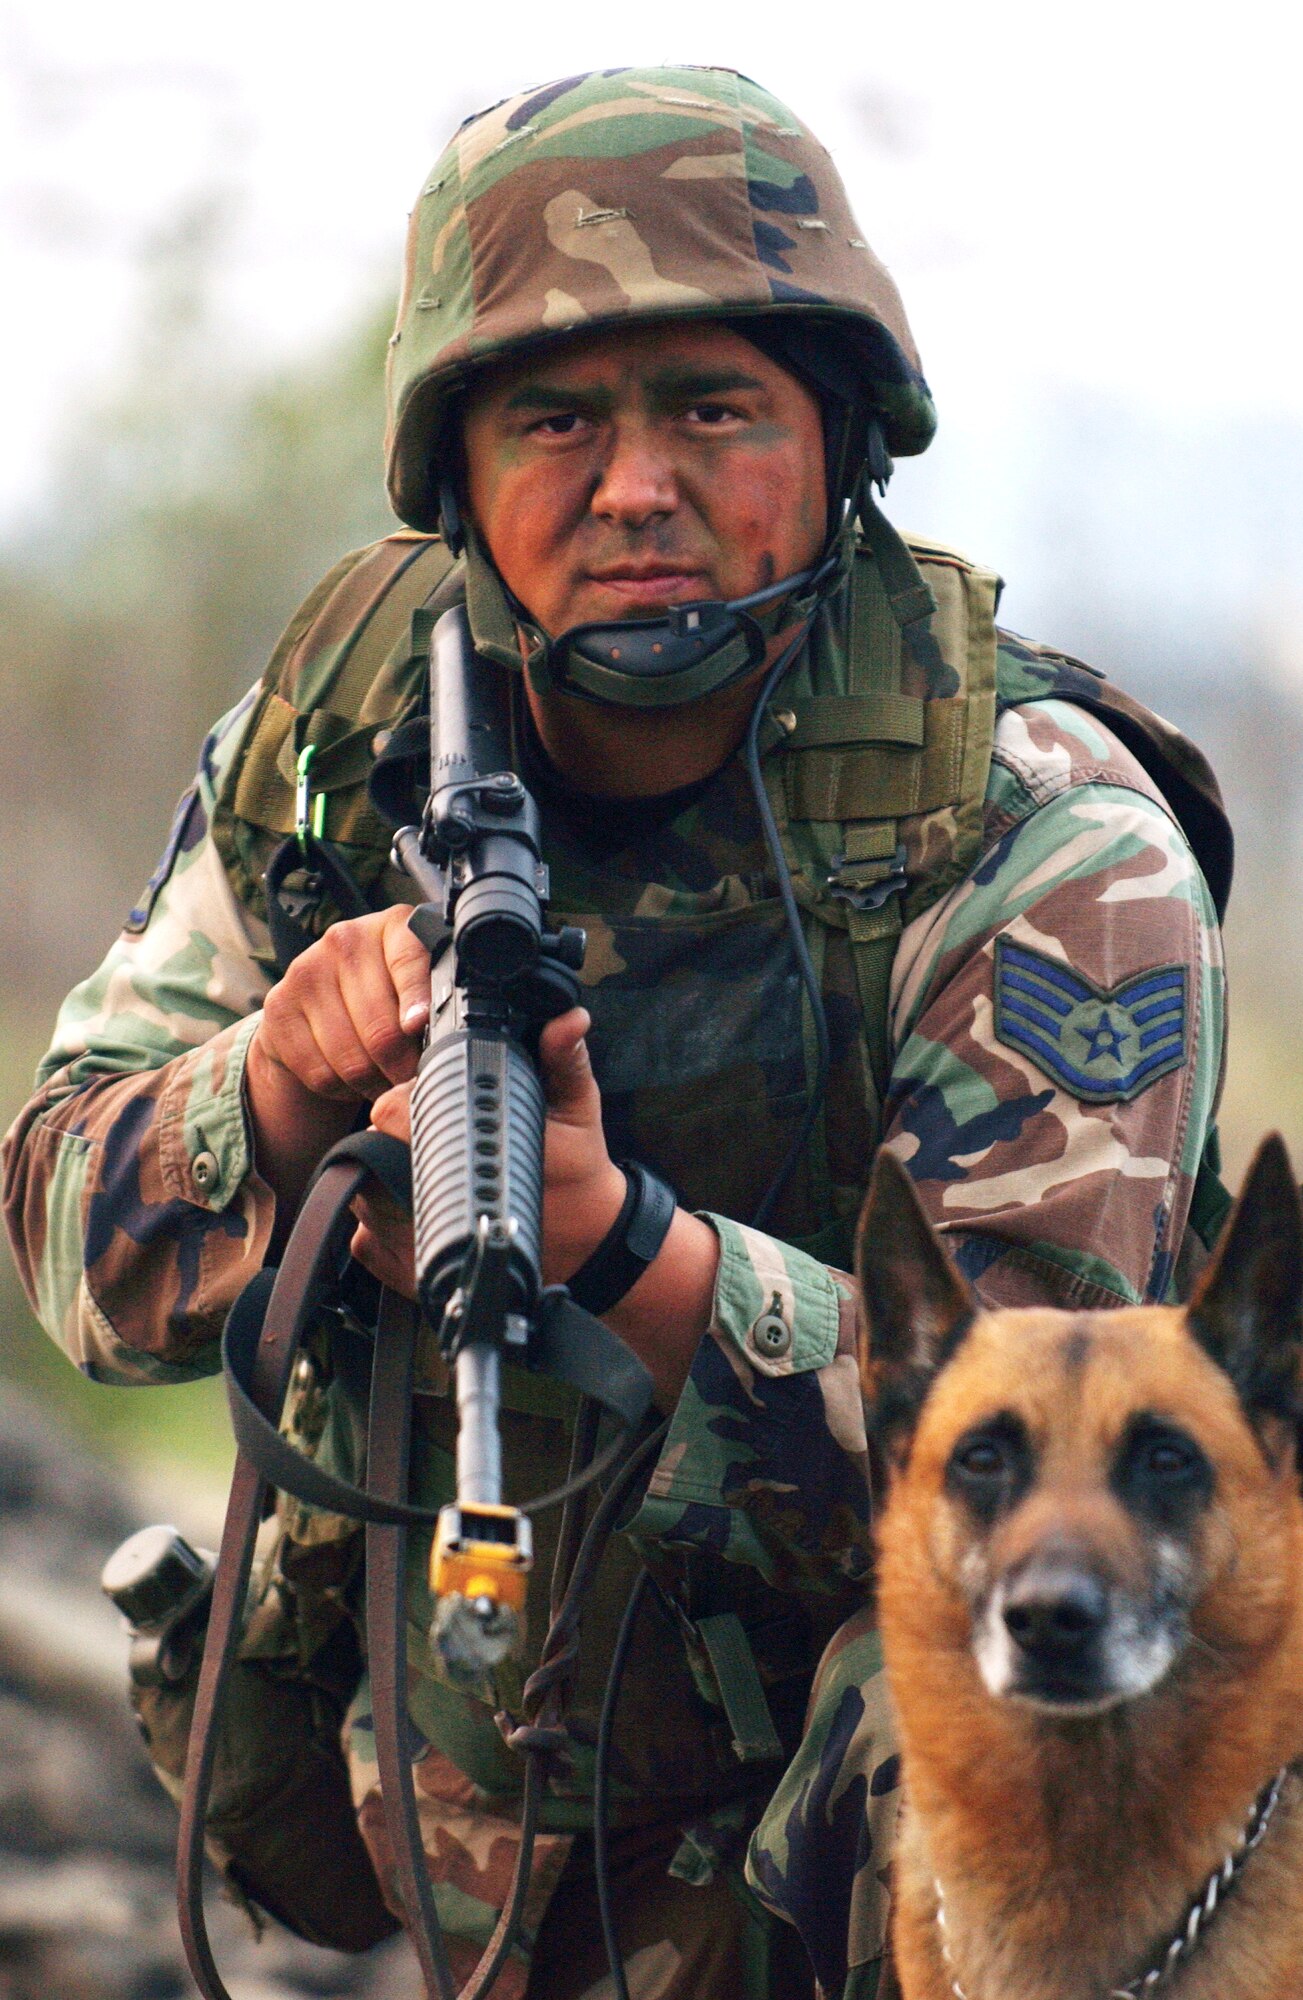 Staff Sgt. Steve Montez patrols the area with his military working dog in a simulated attack during a Commando Warrior class exercise at Osan Air Base, South Korea. Commando Warrior trains Airmen throughout the Pacific Air Forces area for deployments supporting the war on terrorism. Sergeant Montez is assigned to Kadena AB, Japan. (U.S. Air Force photo/Amn. Gina Chiaverotti)